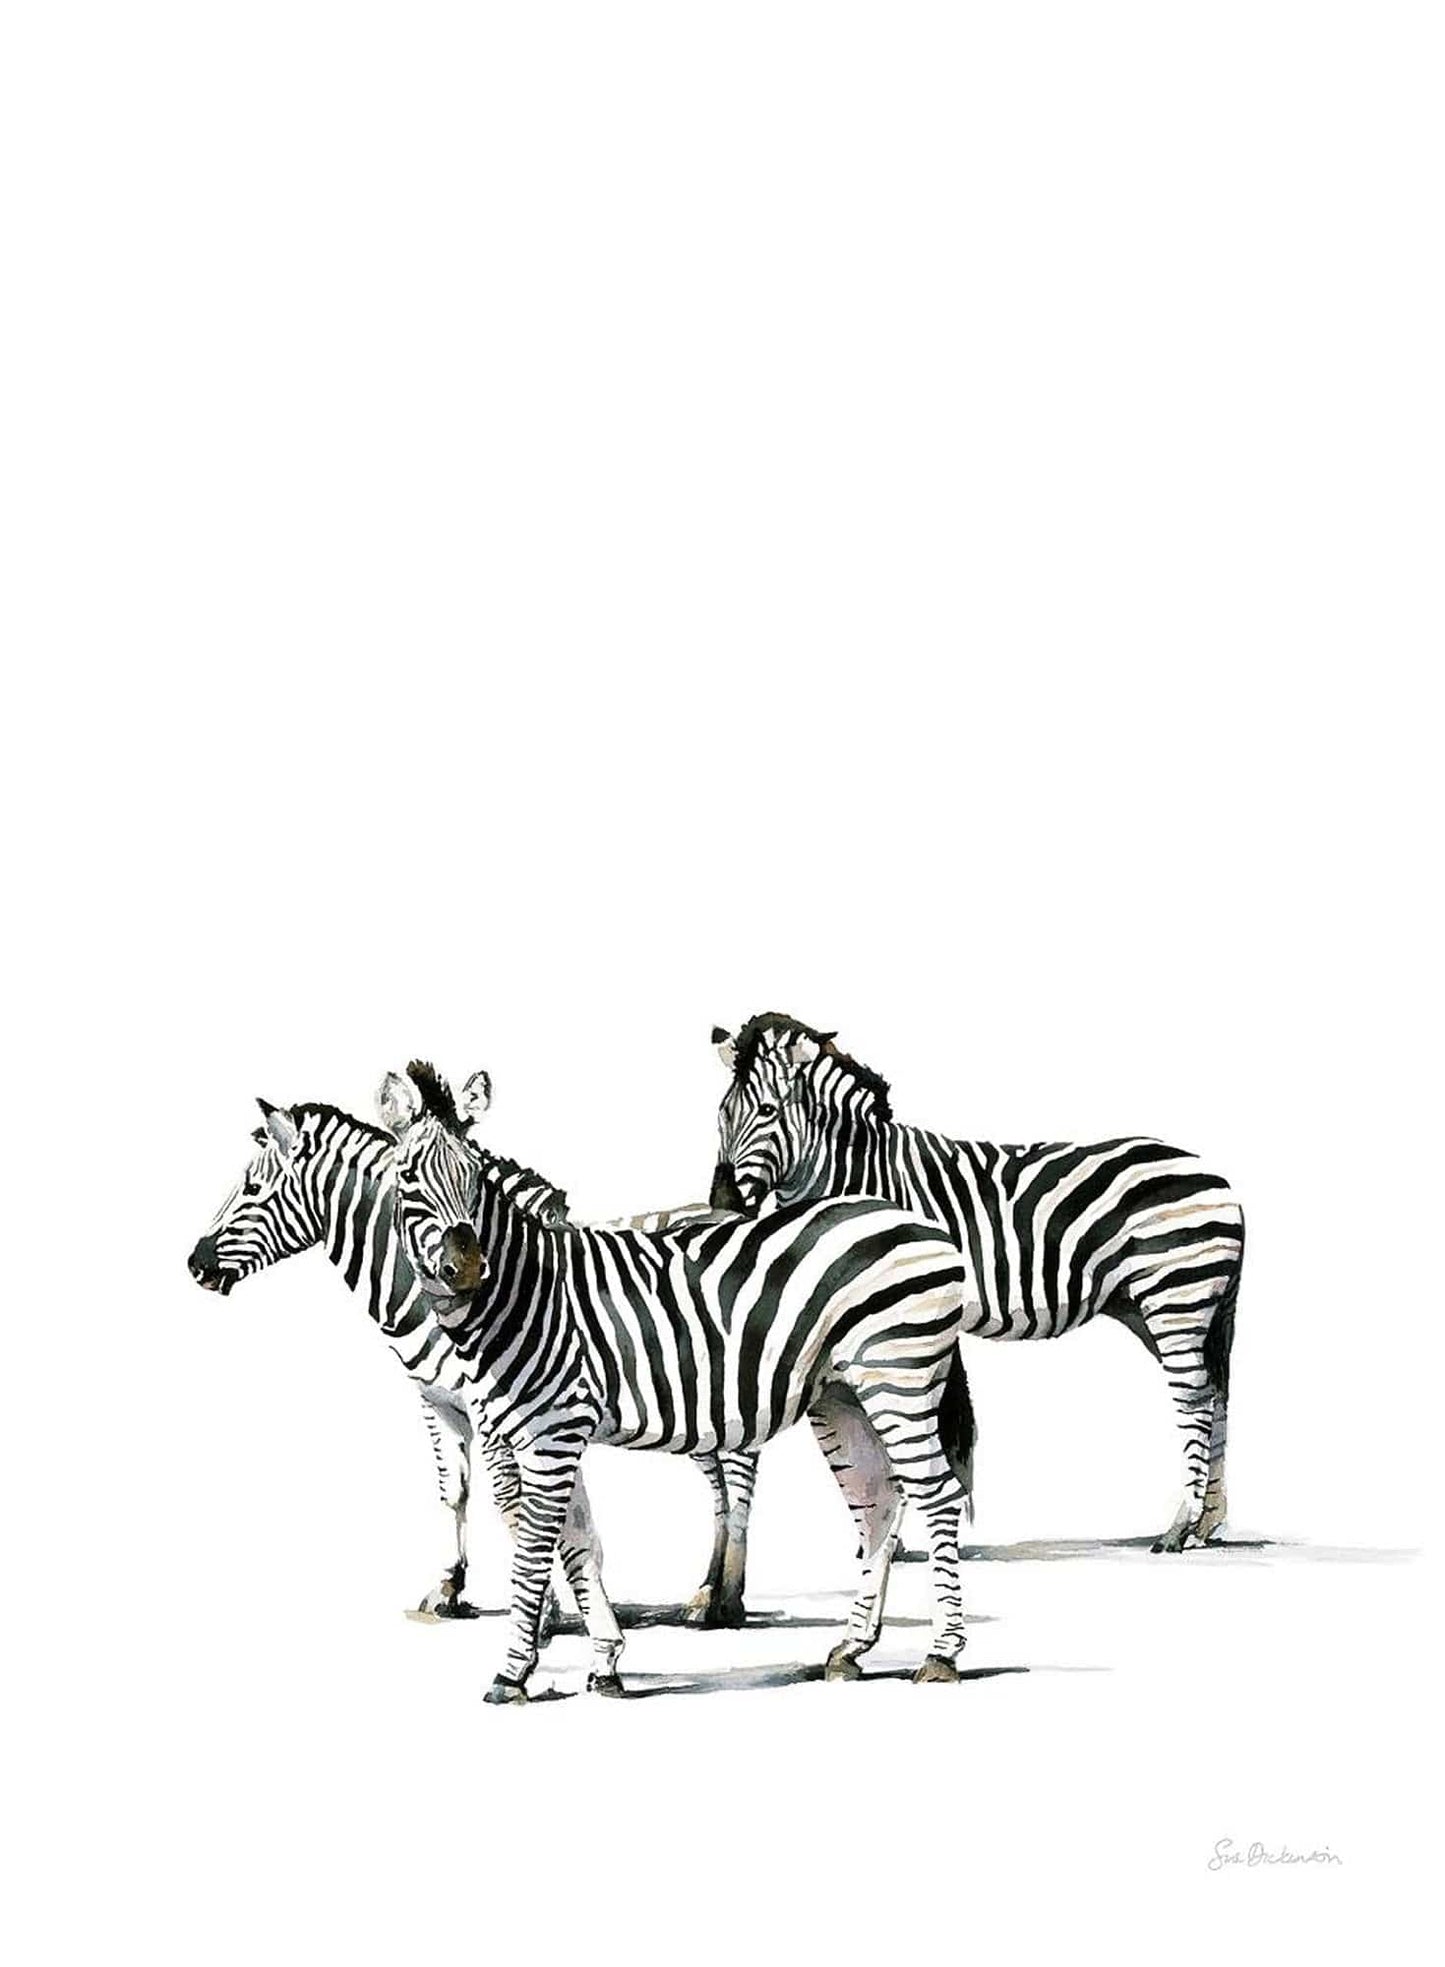 South African Limited Editions by Sue Dickinson - Midday at the Salt Pan - Zebras Vertical - Fine Art Portfolio